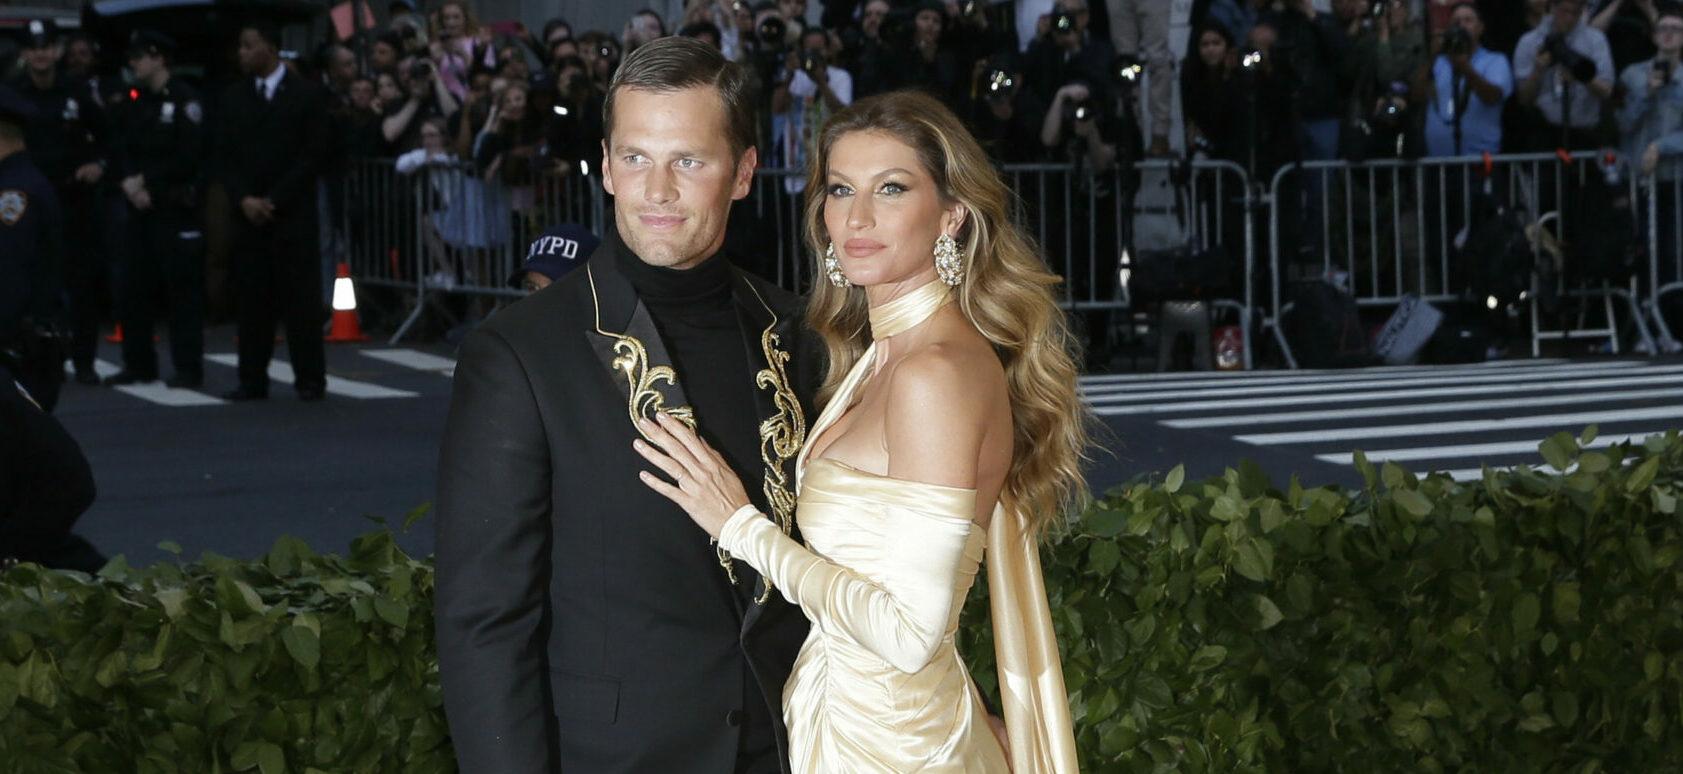 Gisele Bündchen Planned To Live Within Swimming Distance From Tom Brady Before Divorce